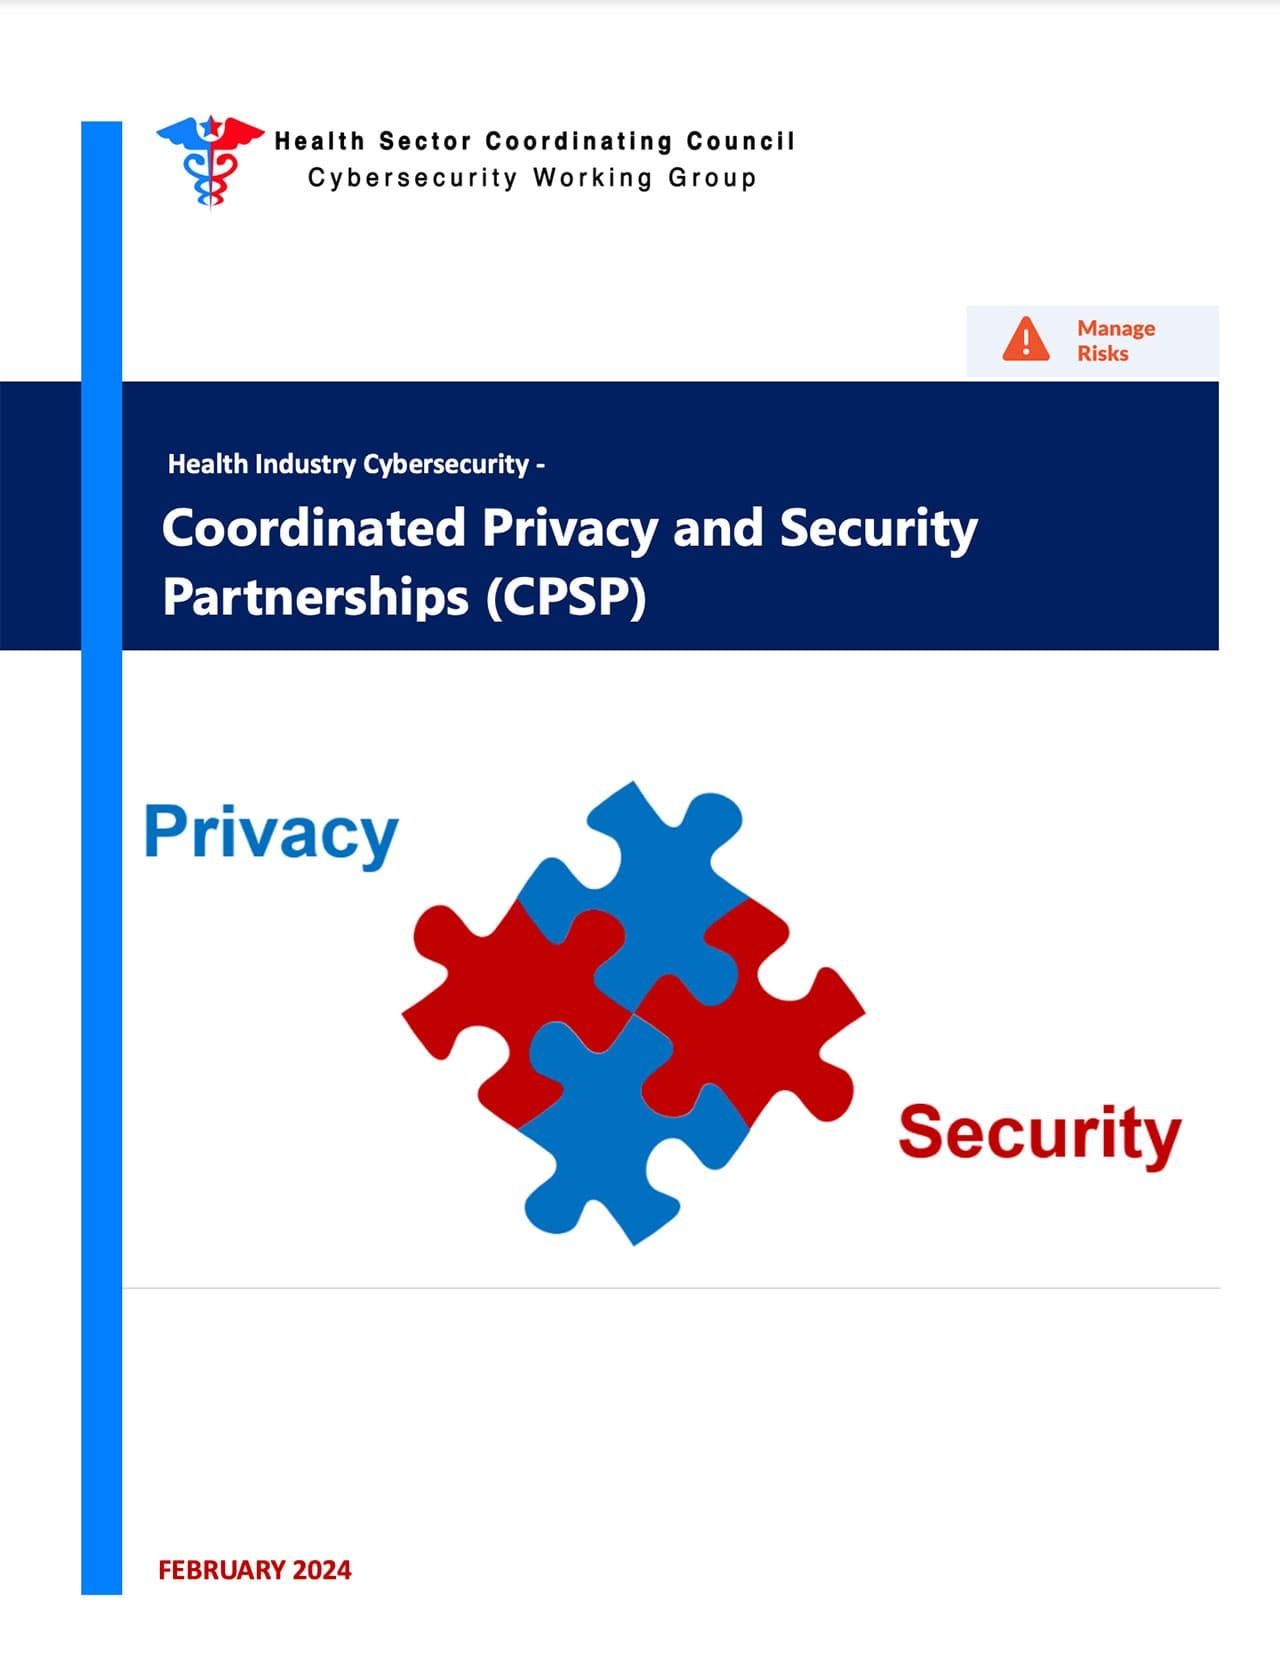 Health Industry Cybersecurity – Coordinated Privacy Security Partnerships (HIC-CPSP)